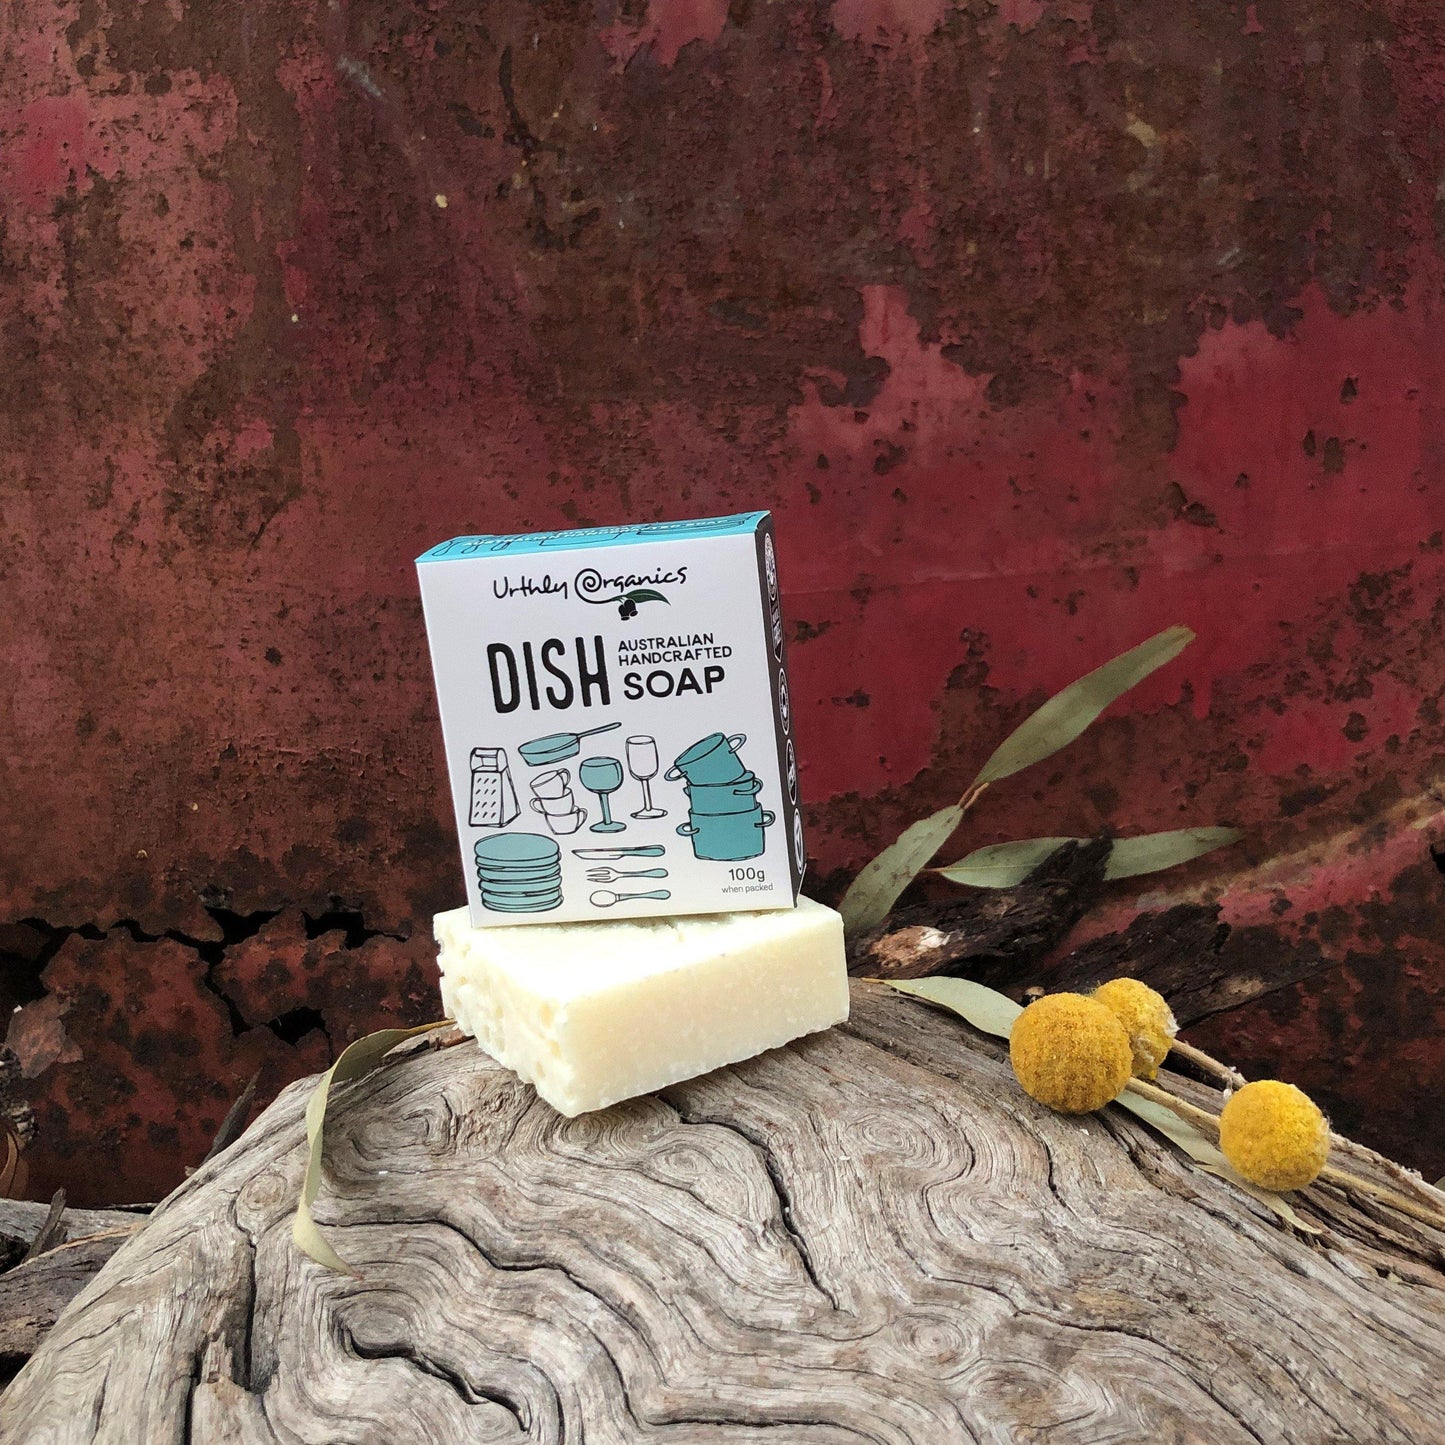 Lemongrass and Eucalyptus Dish Soap - UrthlyOrganics Natural ethical skincare and cleaning